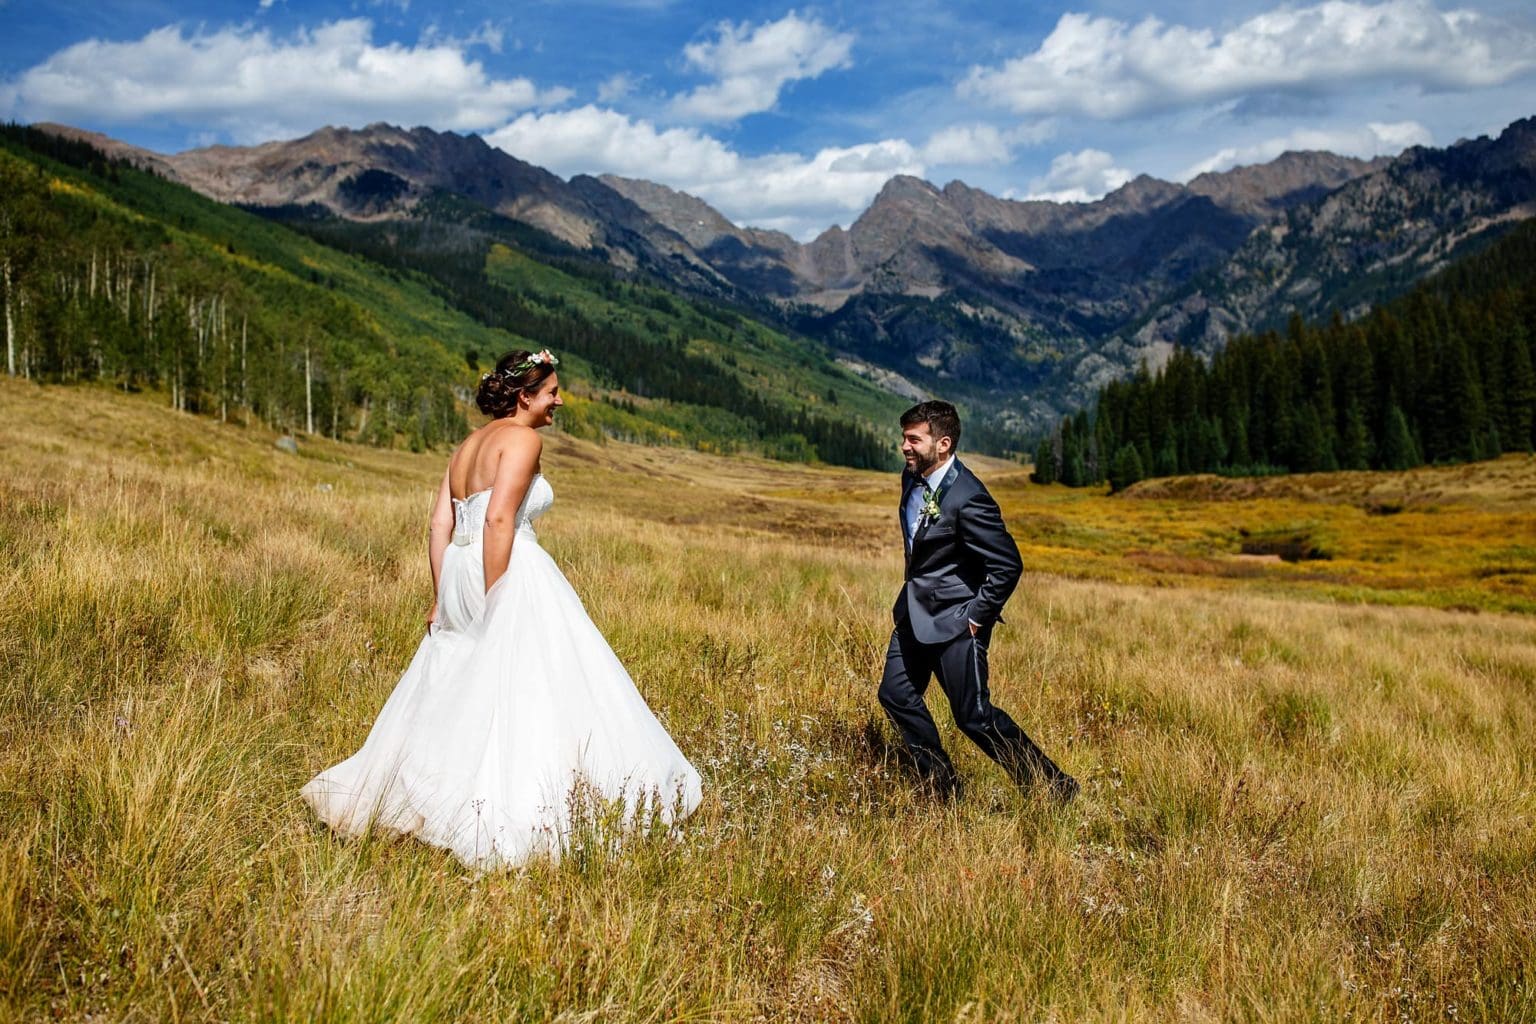 Becky and Brian share a moment during their first look at Piney River Ranch in front of the Gore mountain range.